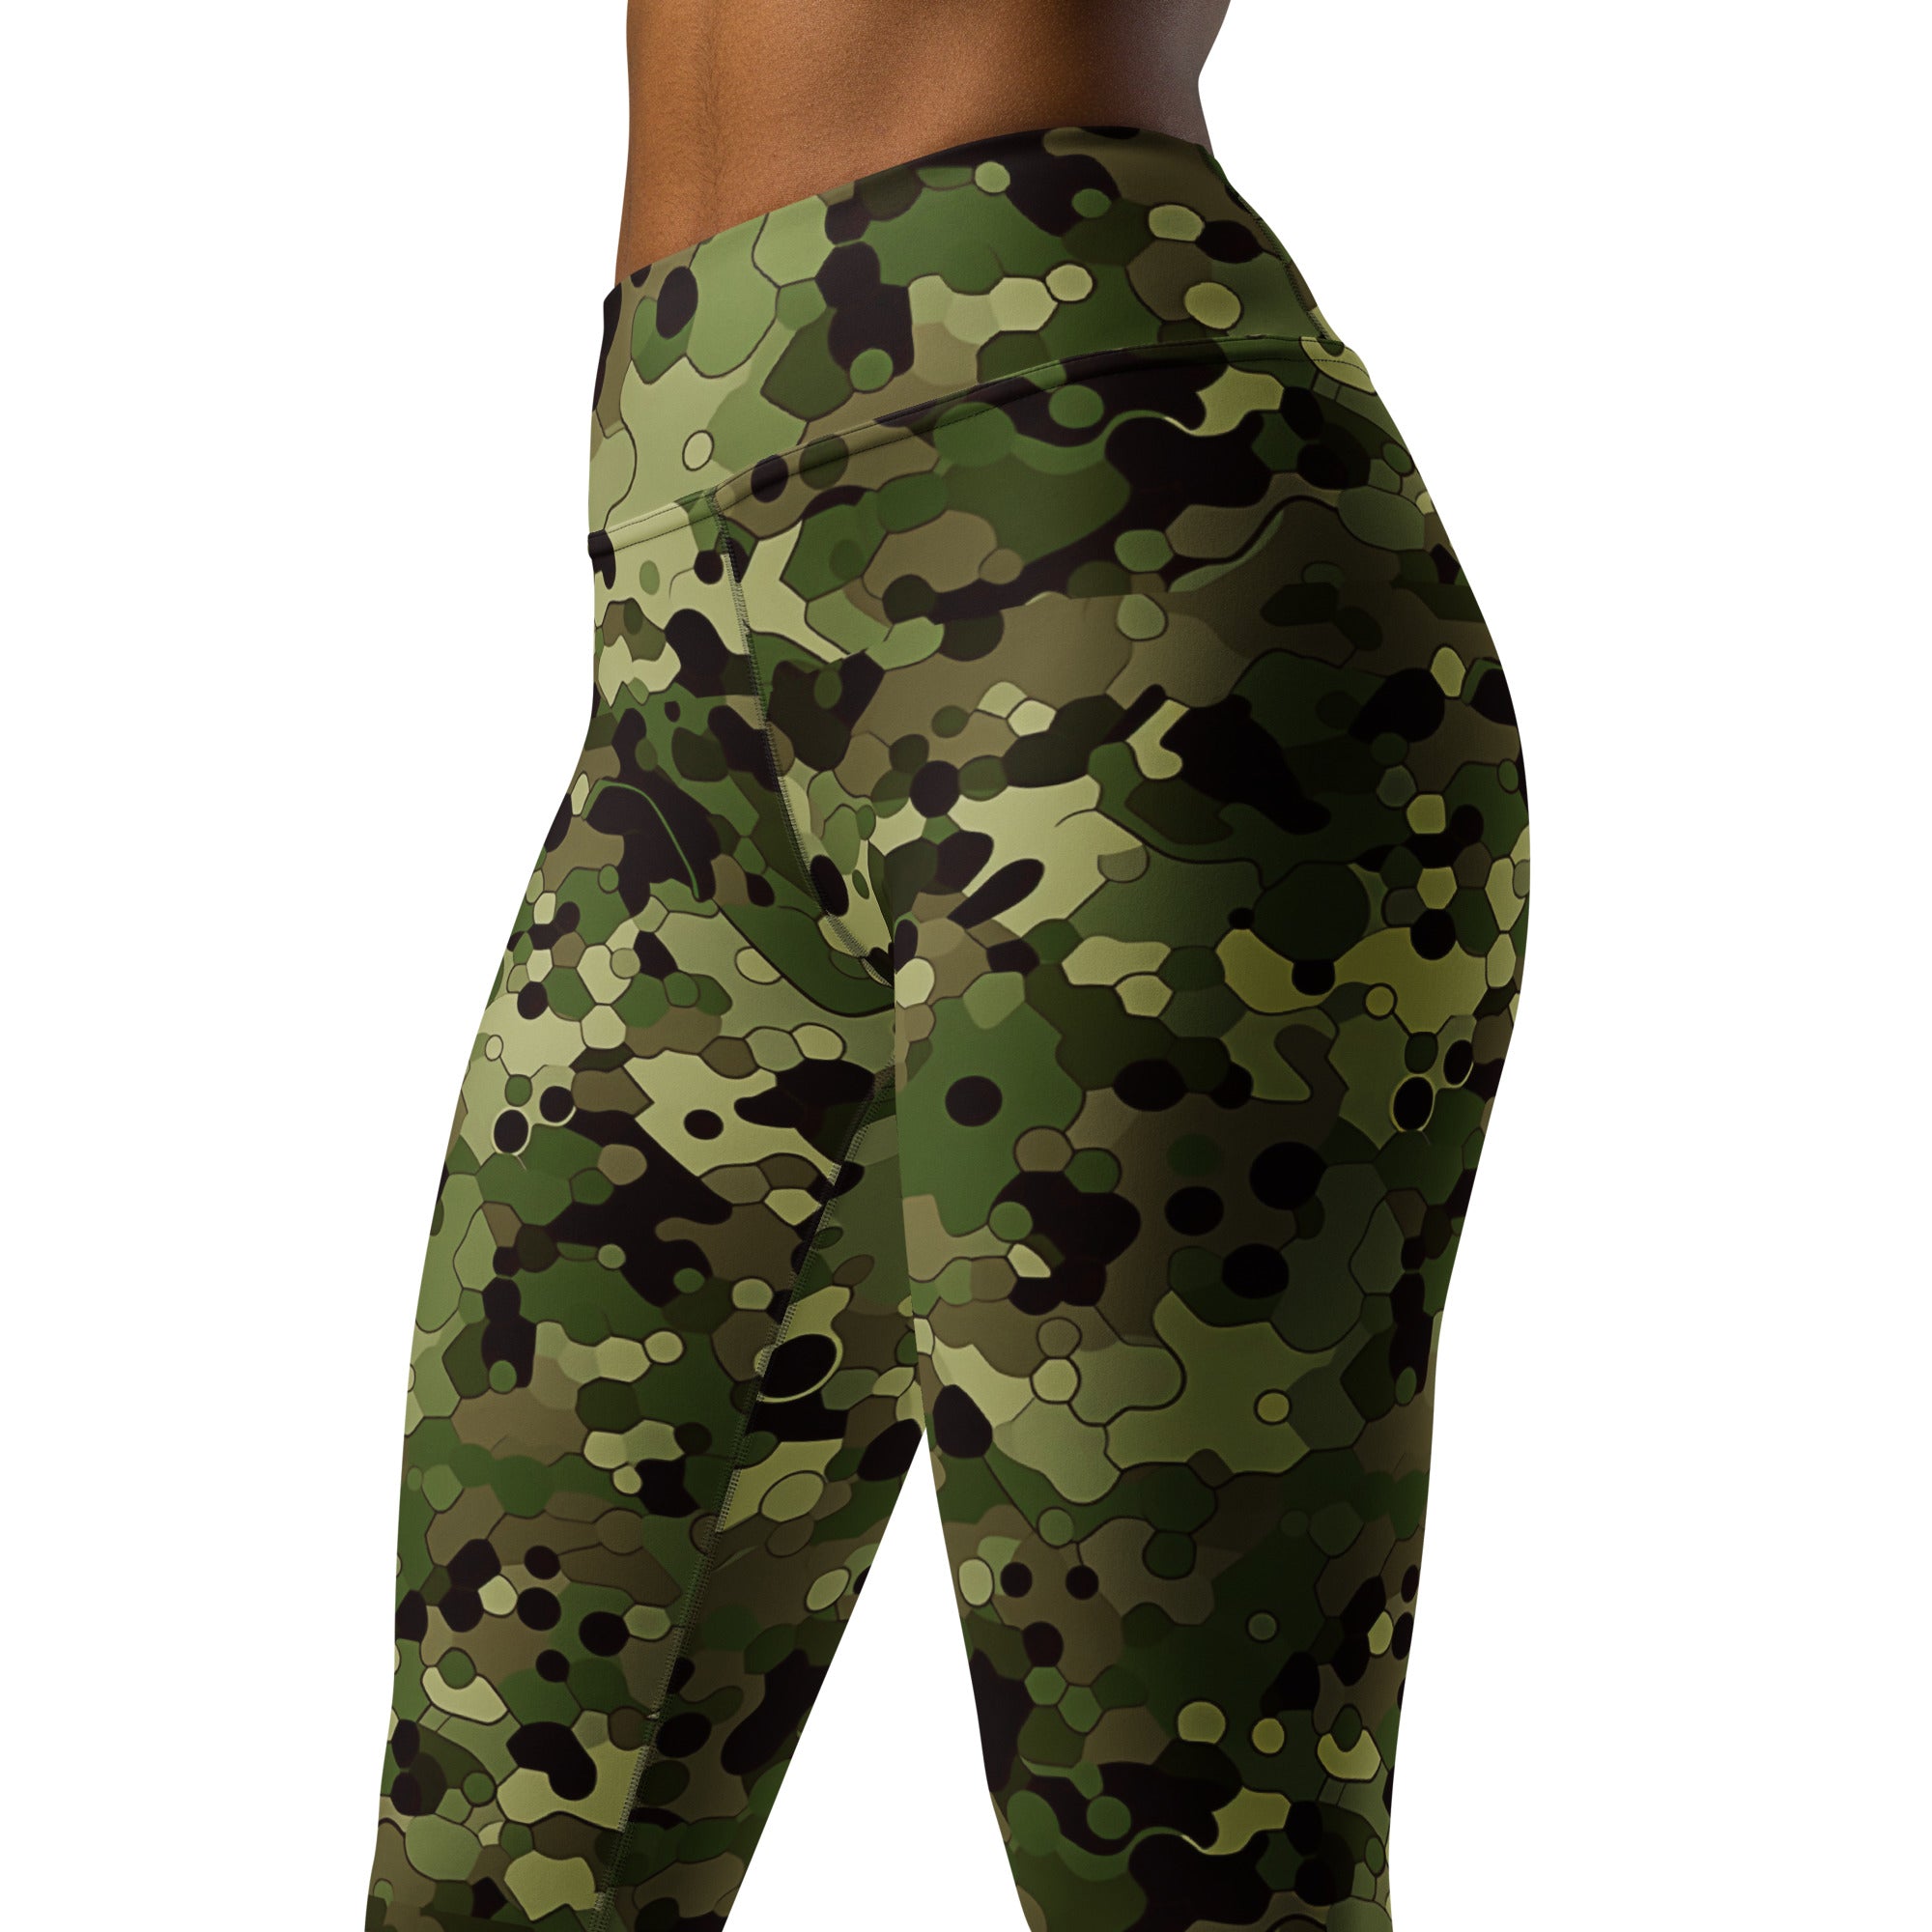 Camo Yoga Pants Women's Camouflage Print Activewear Stretchy Workout Tights  Military Style Fitness Leggings Trendy Exercise Pants - Etsy